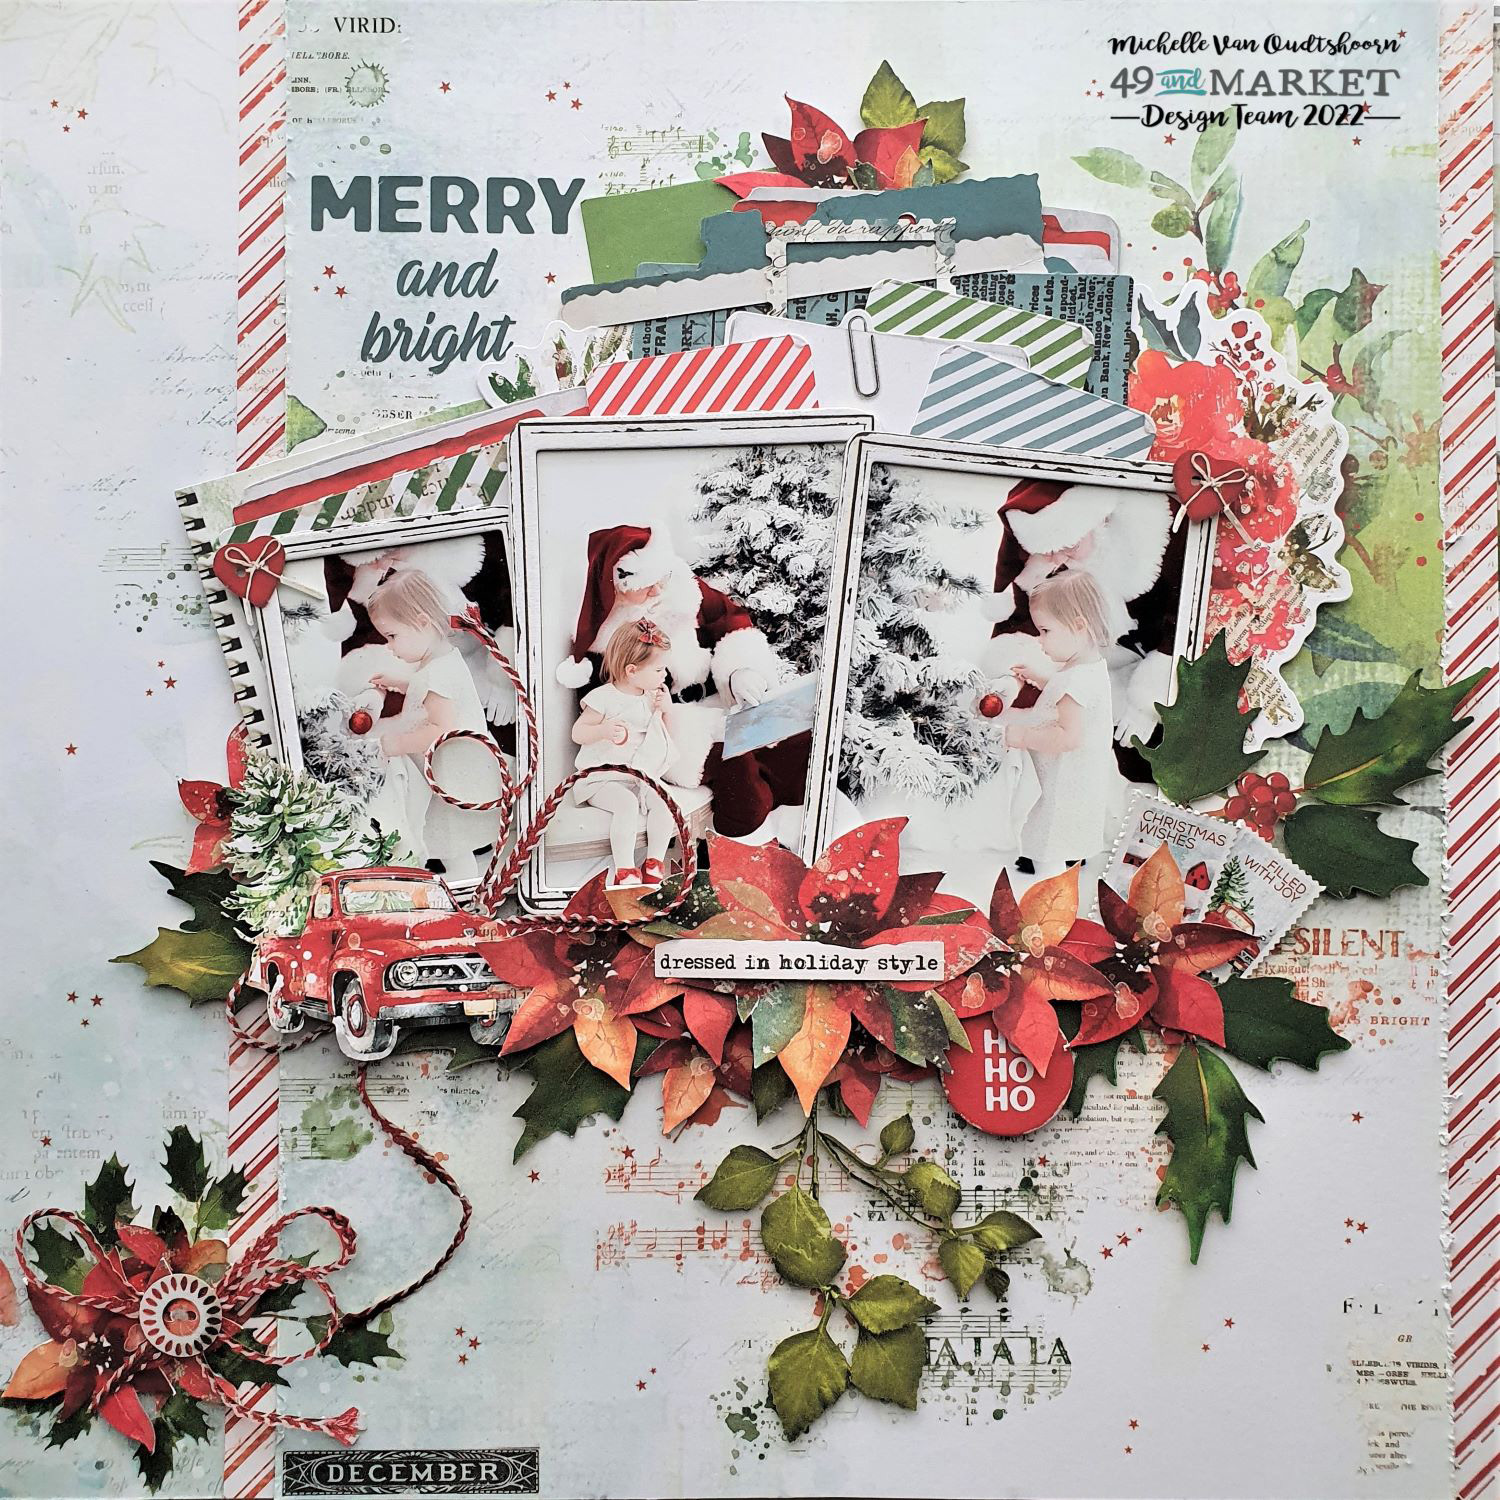 Merry and Bright - Layout by Michelle Van Oudtshoorn